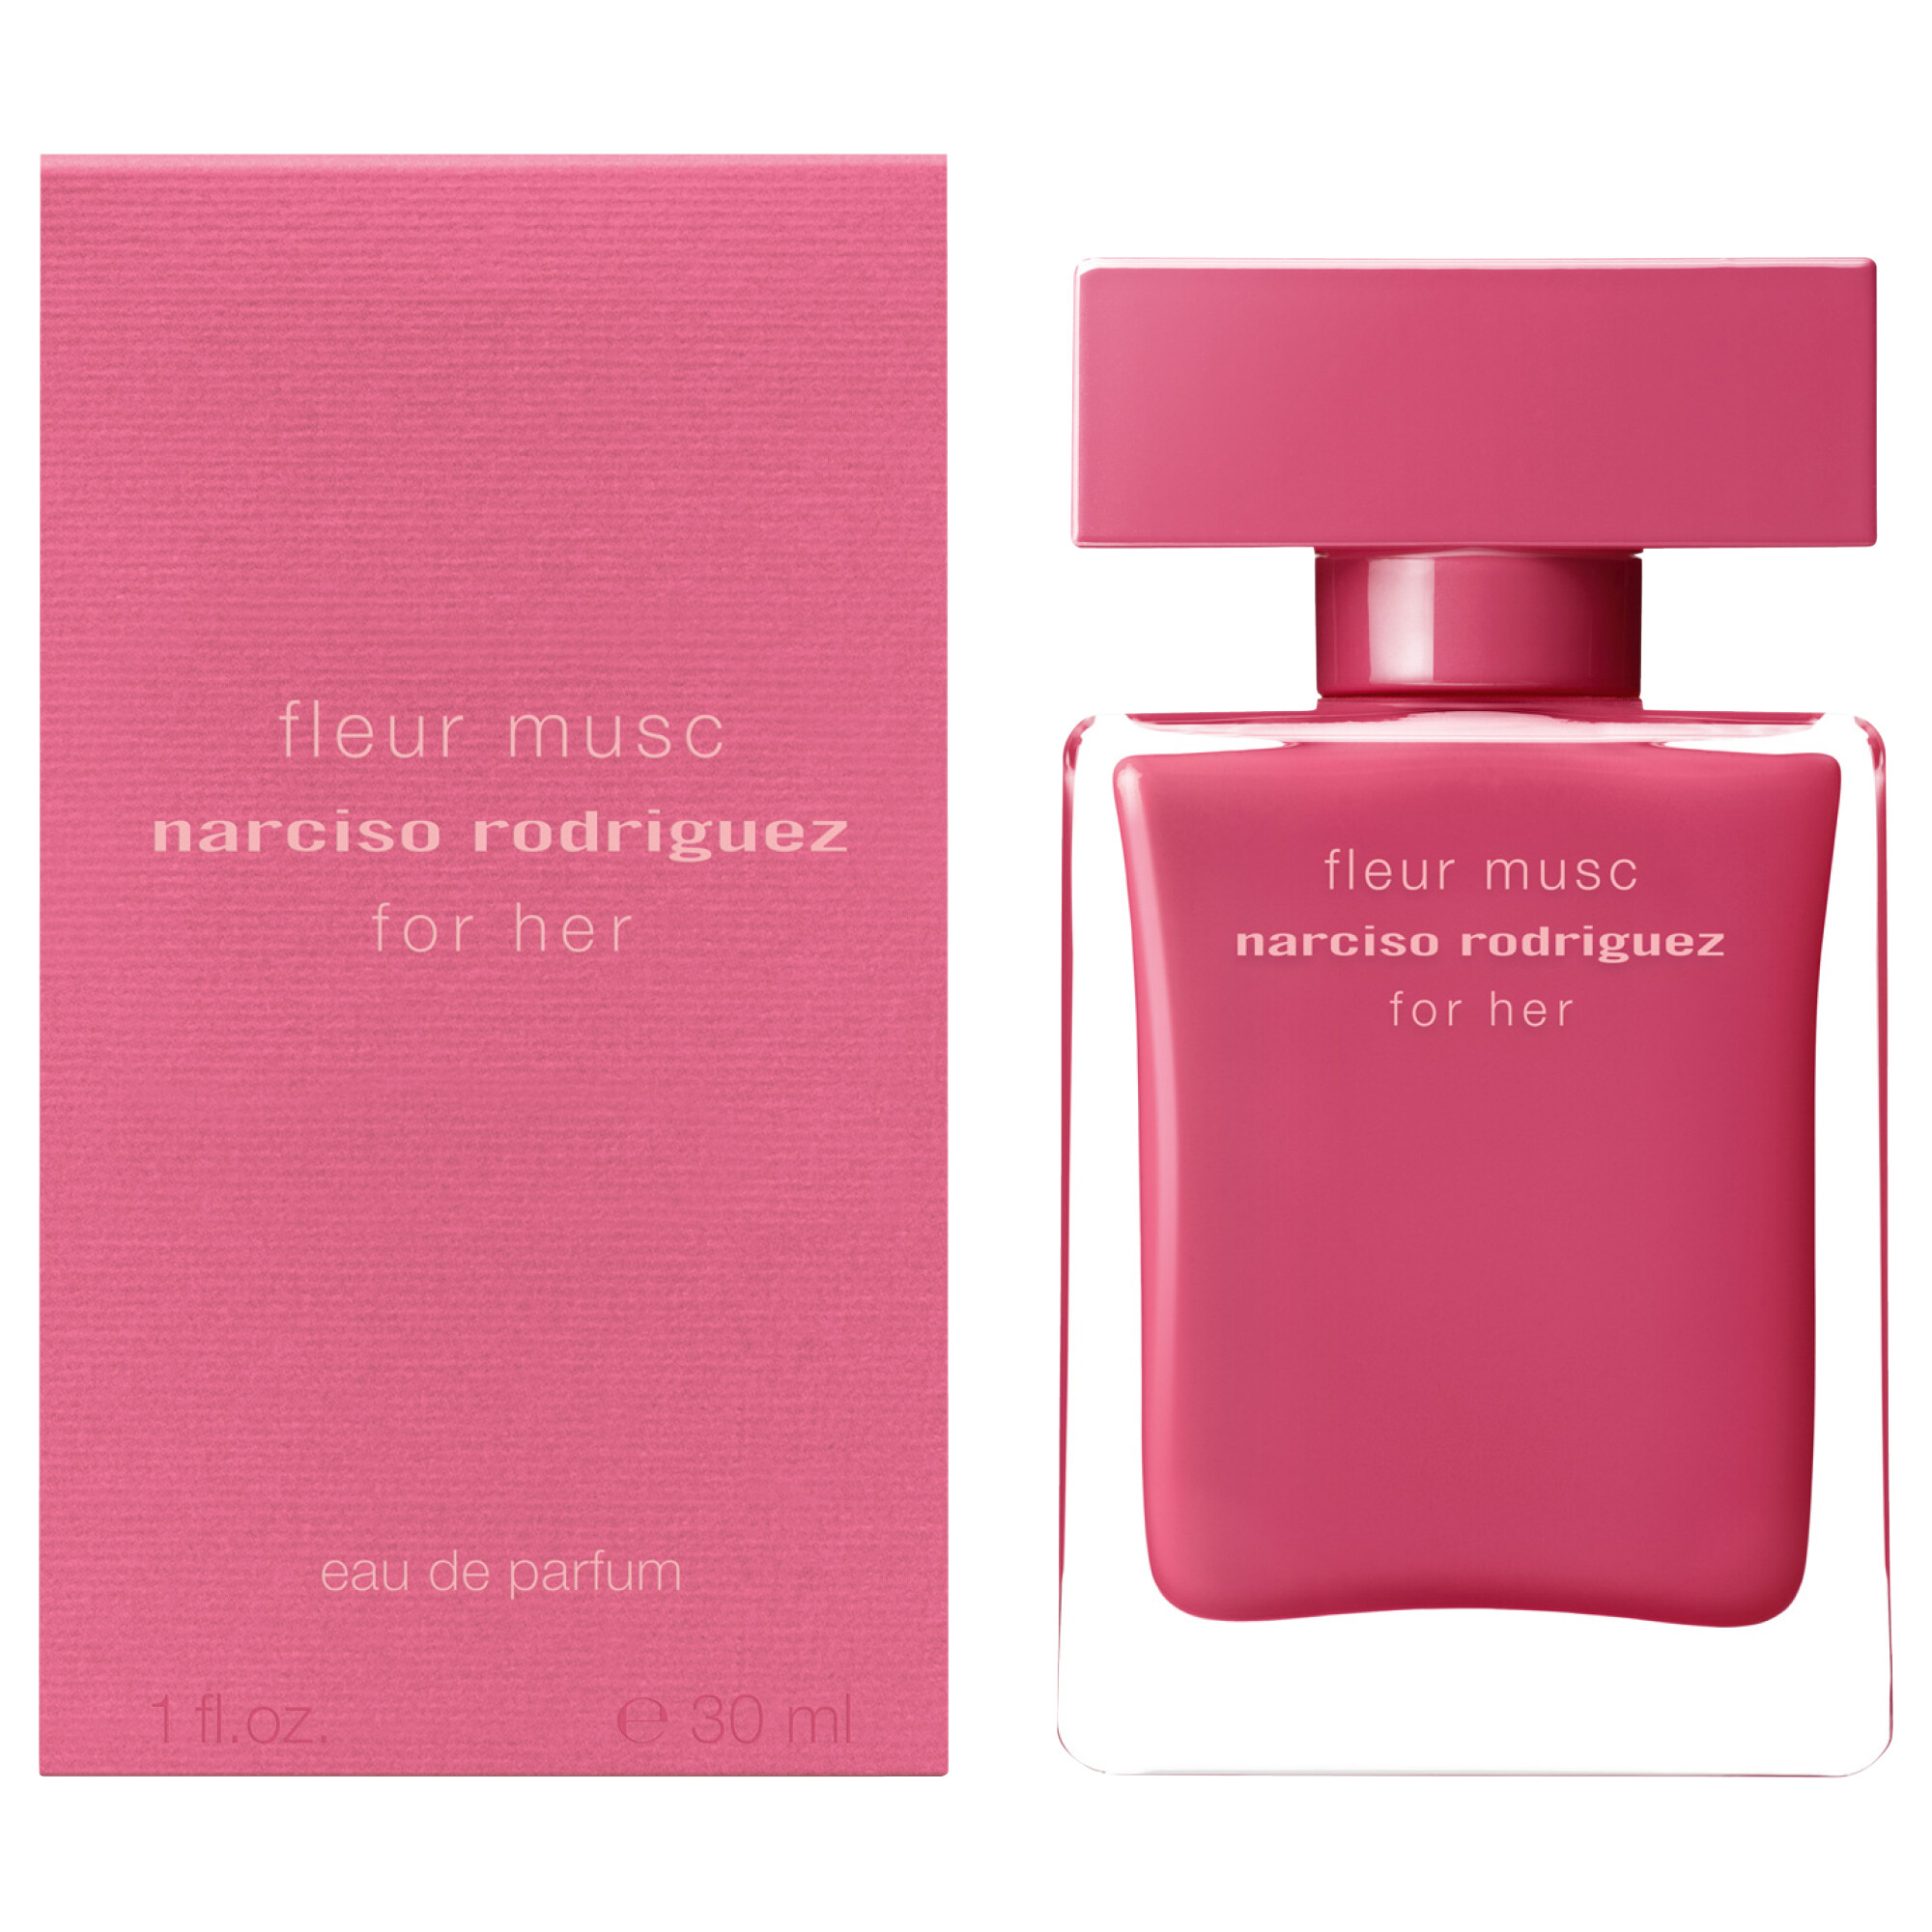 Аромат narciso rodriguez. Narciso Rodriguez for her fleur Musc парфюмерная вода 100 мл. Narciso Rodriguez for her EDP 100ml. Fleur Musc Narciso Rodriguez for her. Narciso Rodriguez for her Eau de Parfum.